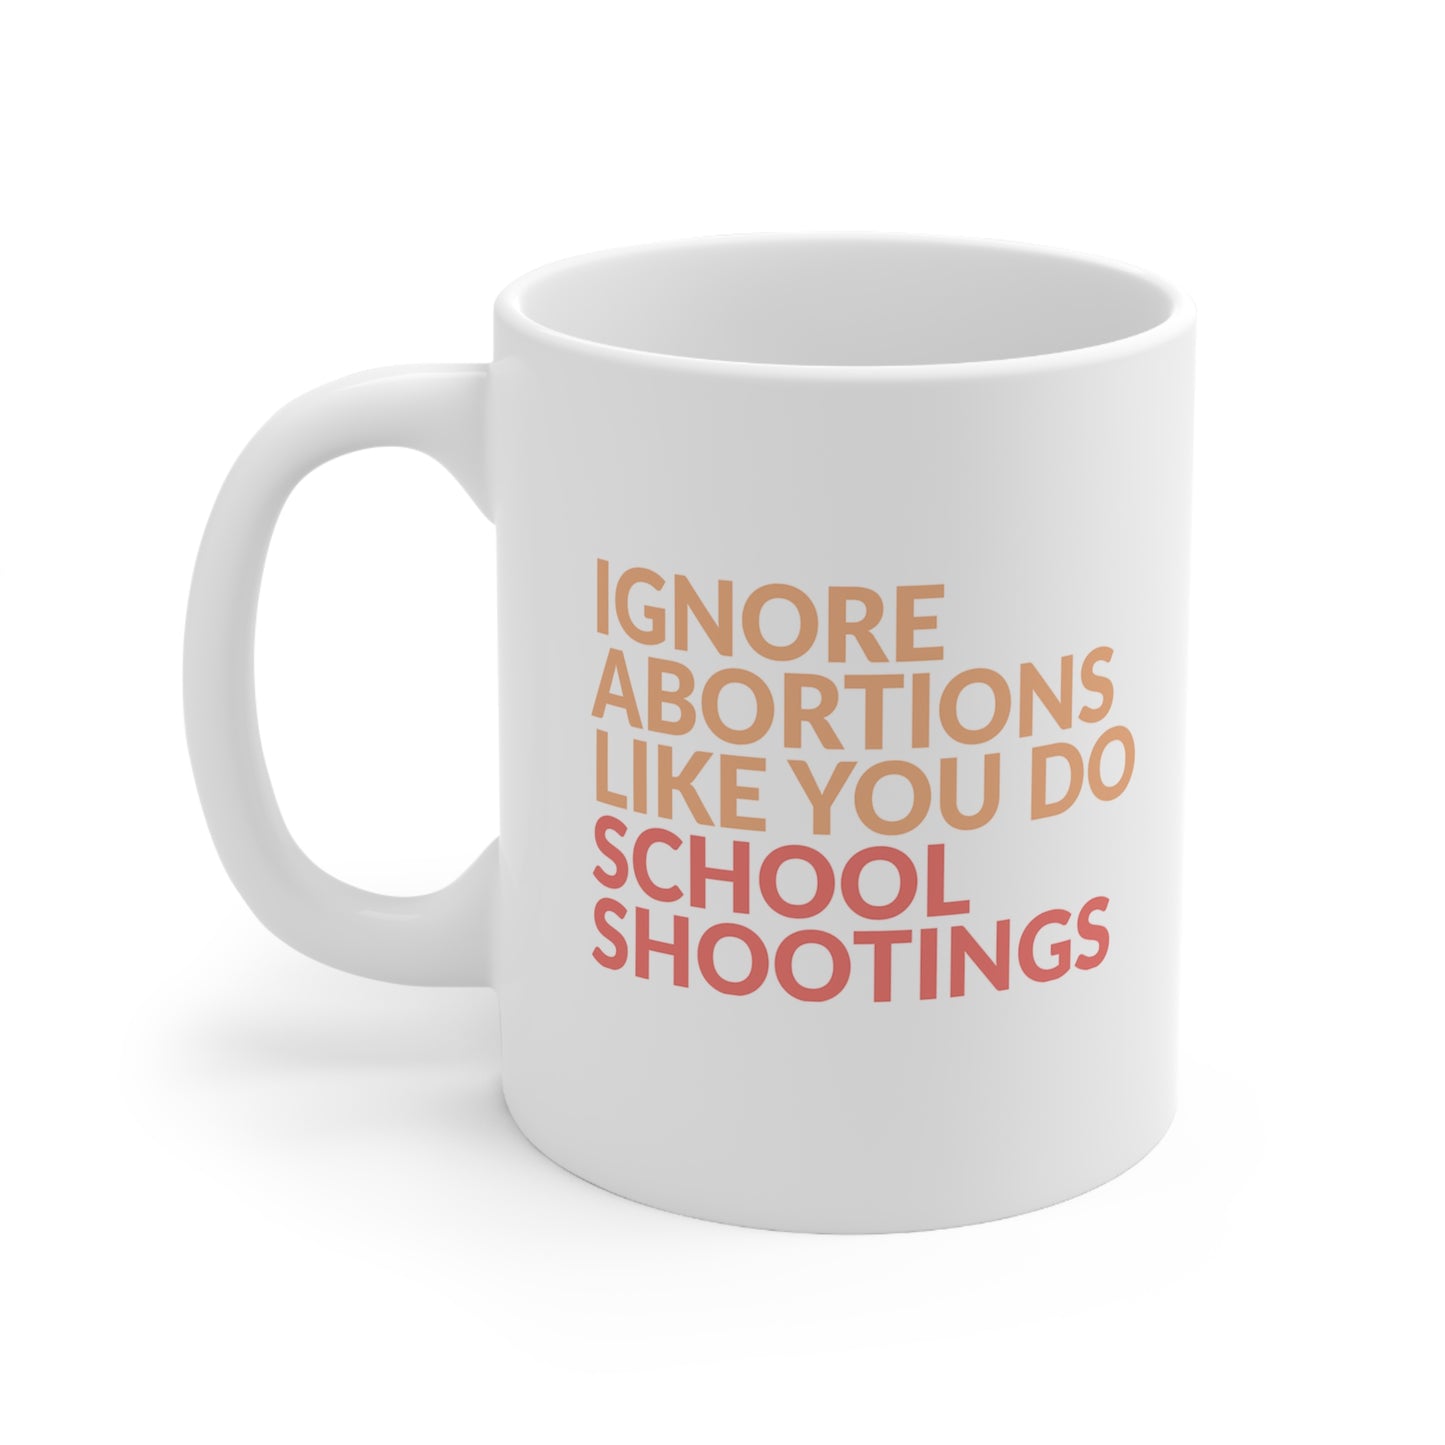 White 11oz ceramic mug that says “Ignore abortions like you do school shootings” in all caps in an orange font. The words “school shootings” are in red. The handle is on the left side in this image.